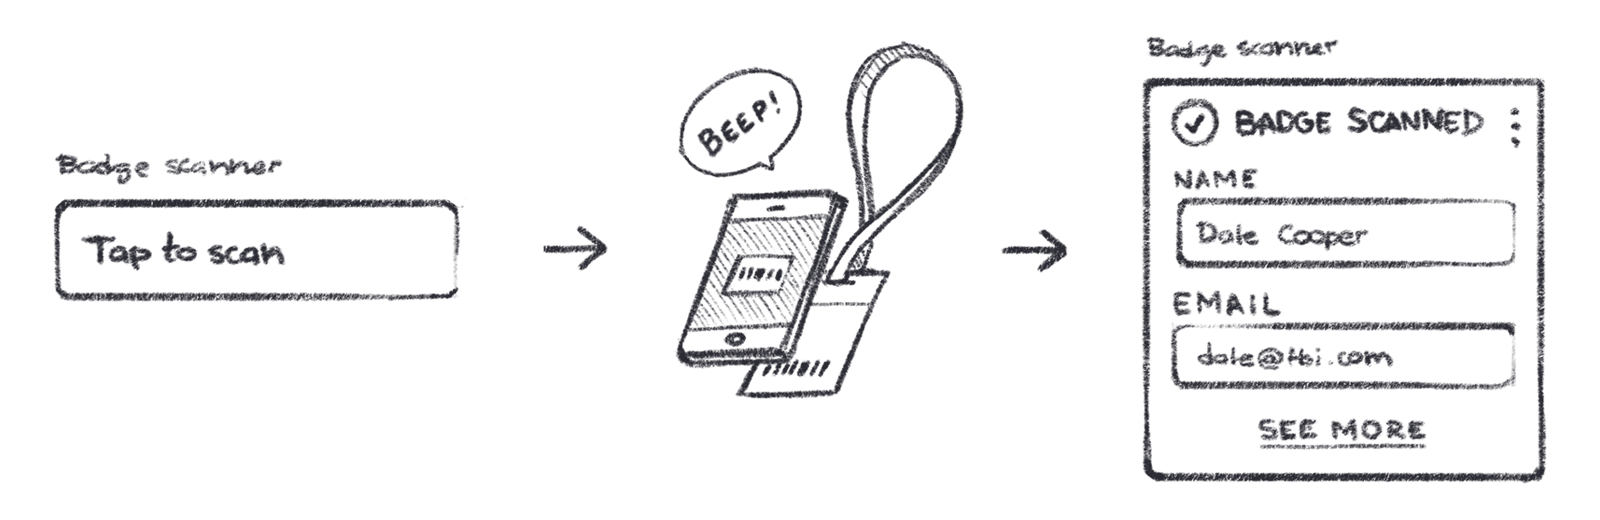 User flow showing an empty badge scanning field, a depiction of a badge being scanned, and a box with the information contained in the badge.